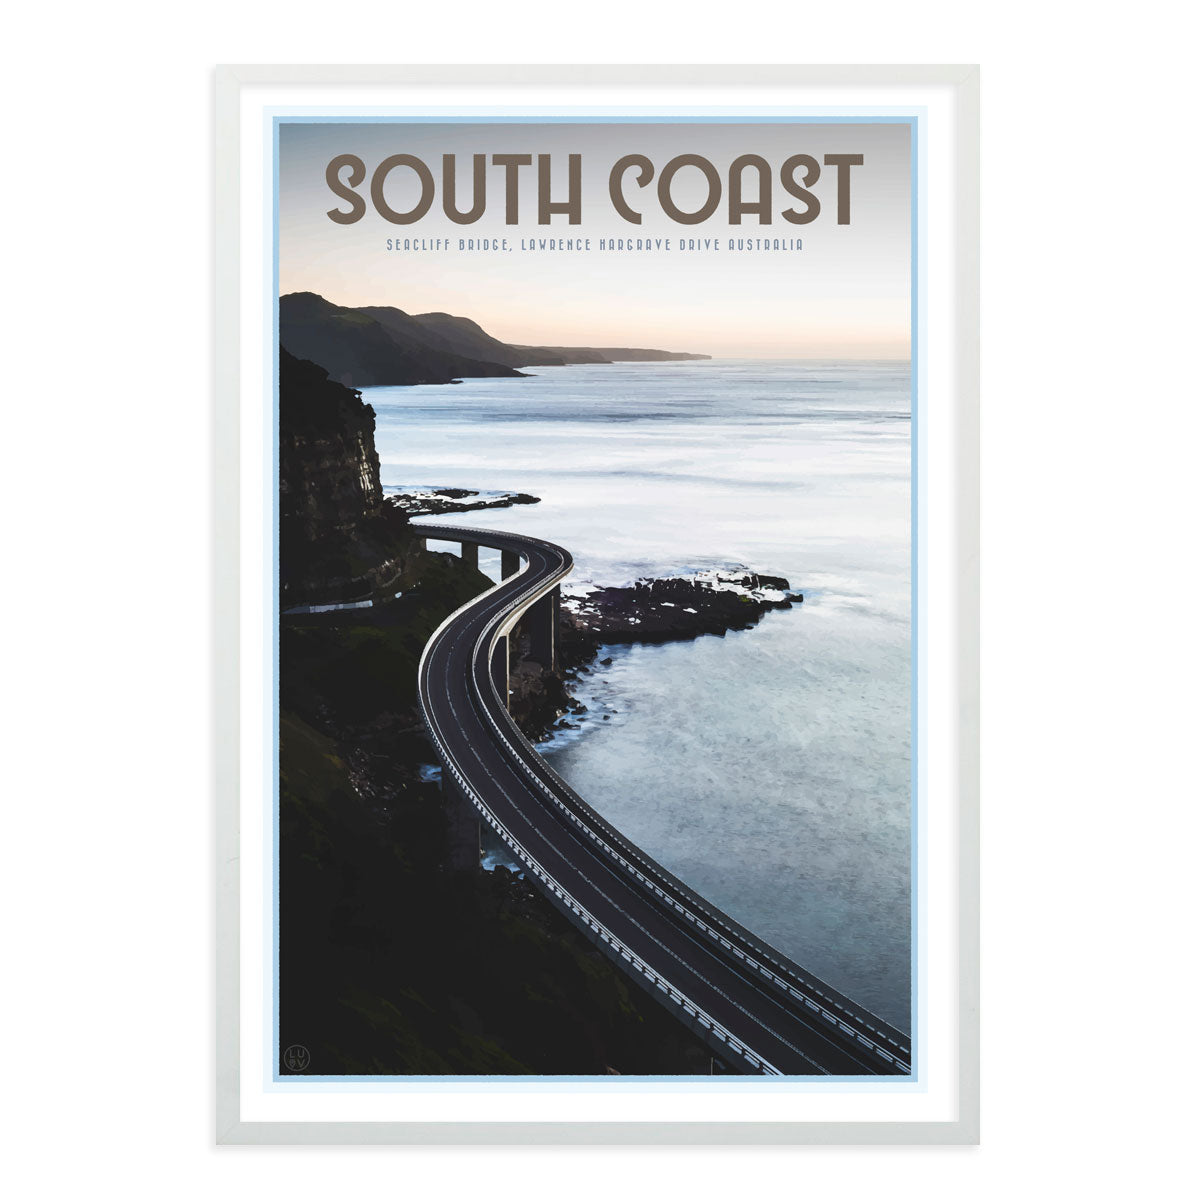 South coast seacliff bridge white framed art print by places we luv